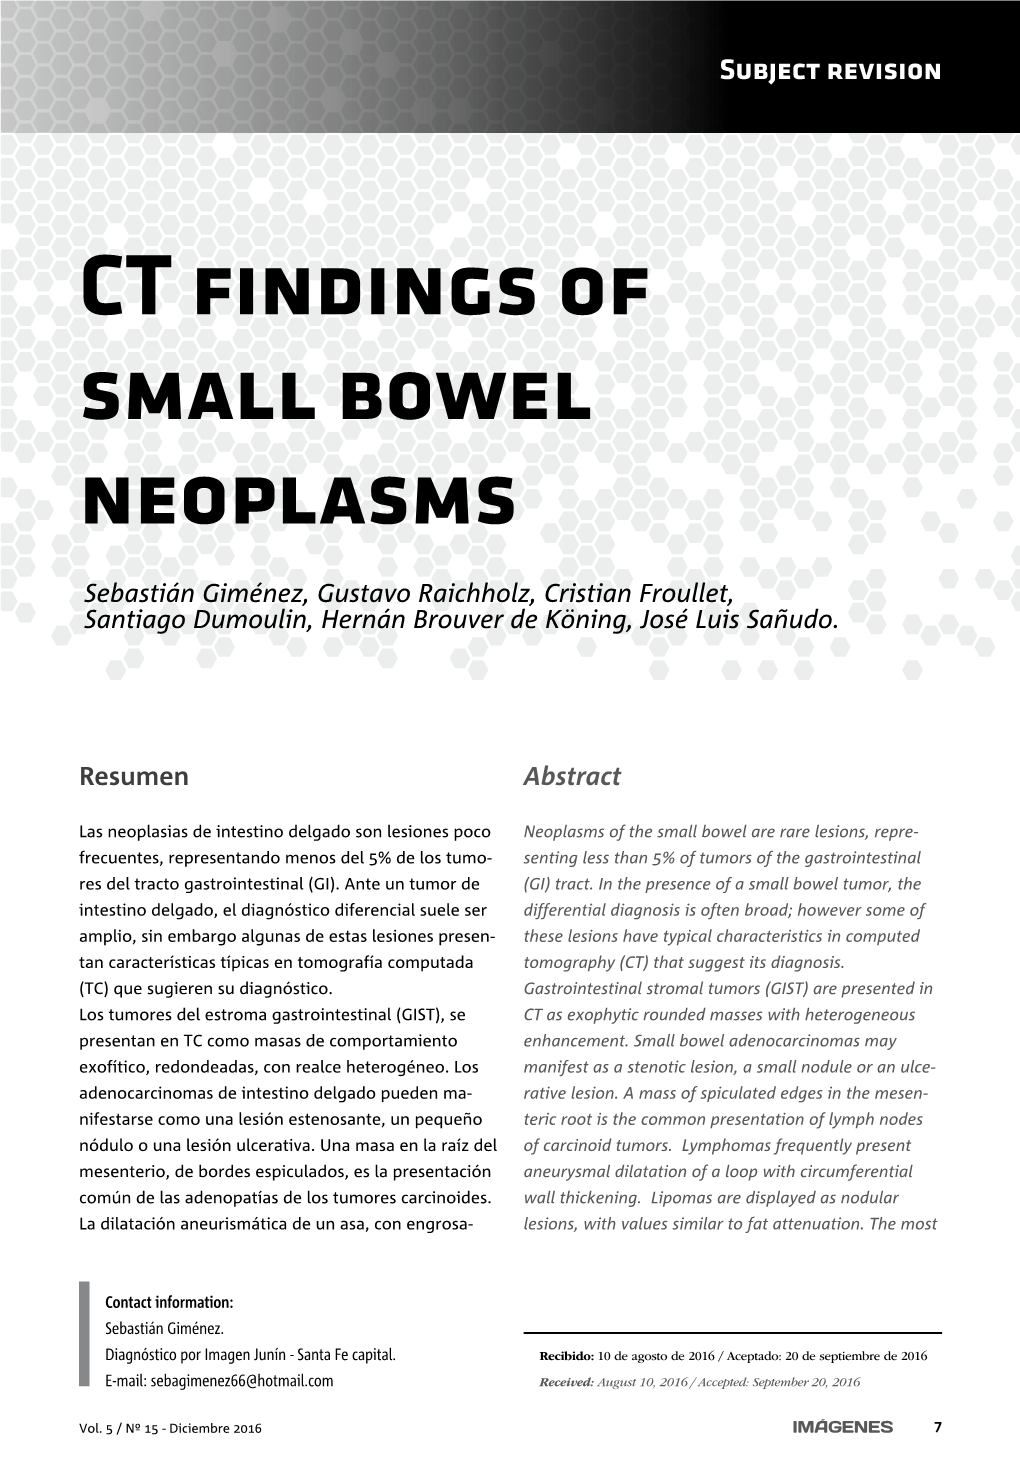 CT Findings of Small Bowel Neoplasms